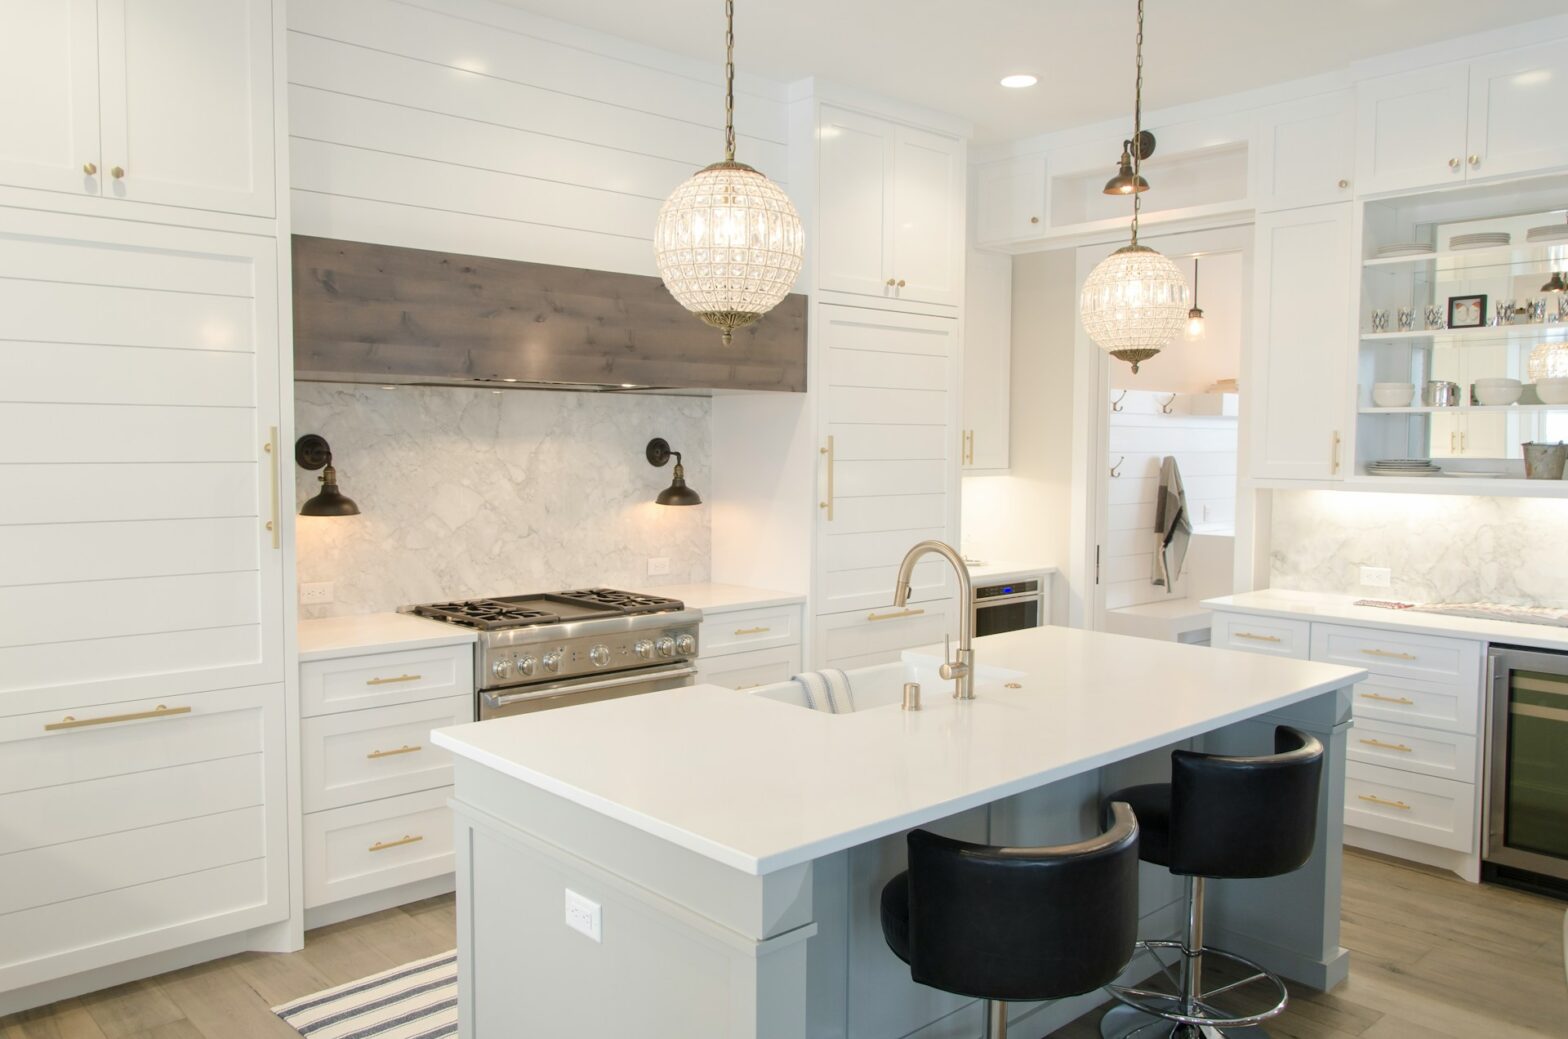 The Importance of Lighting in NYC Kitchen Remodels